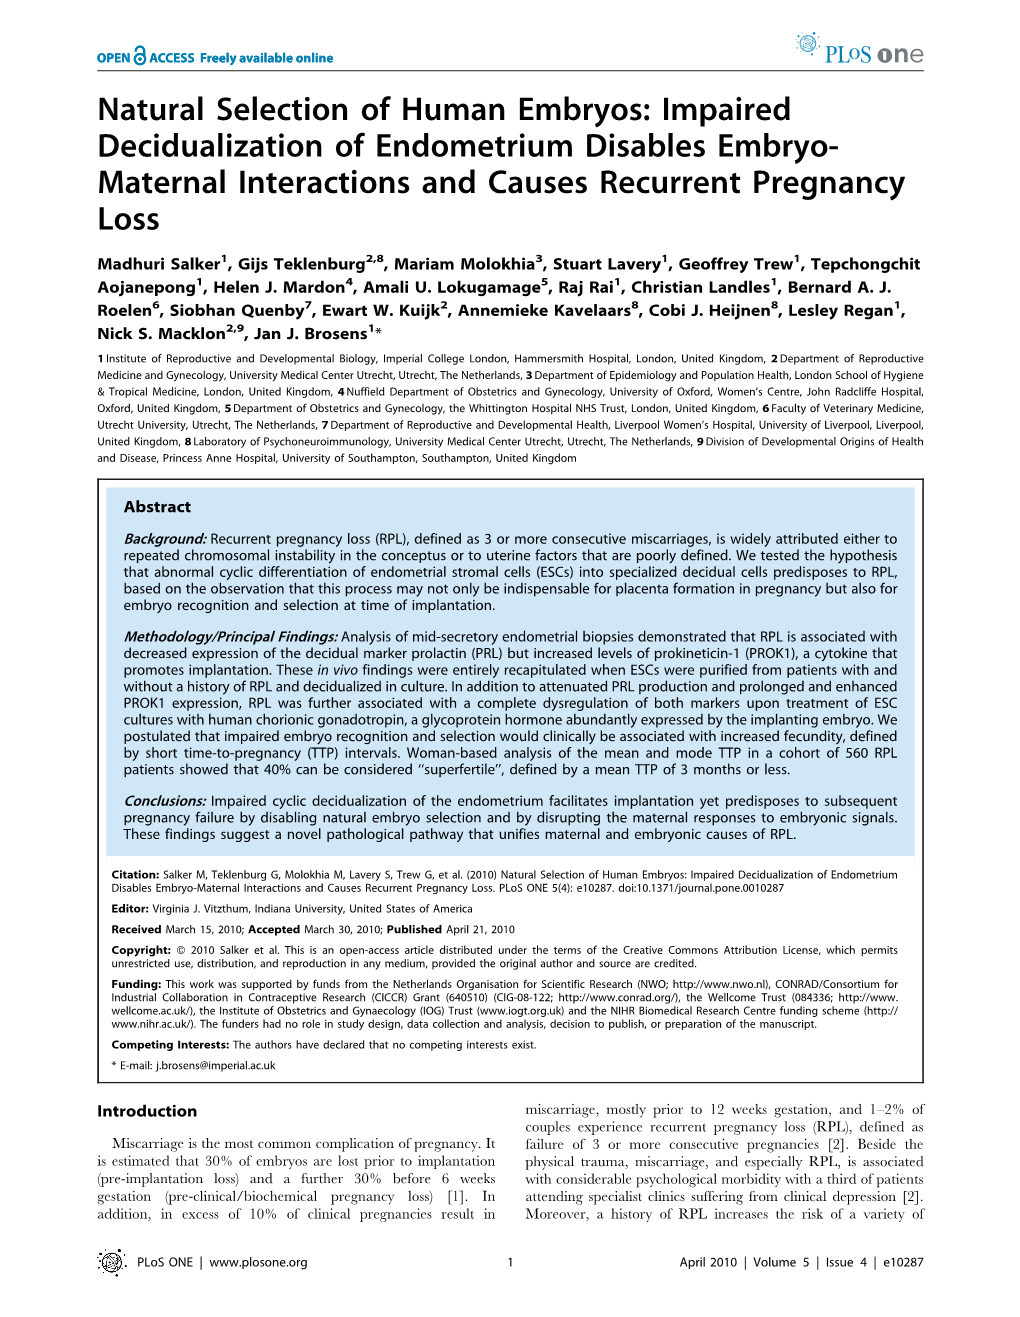 Impaired Decidualization of Endometrium Disables Embryo- Maternal Interactions and Causes Recurrent Pregnancy Loss